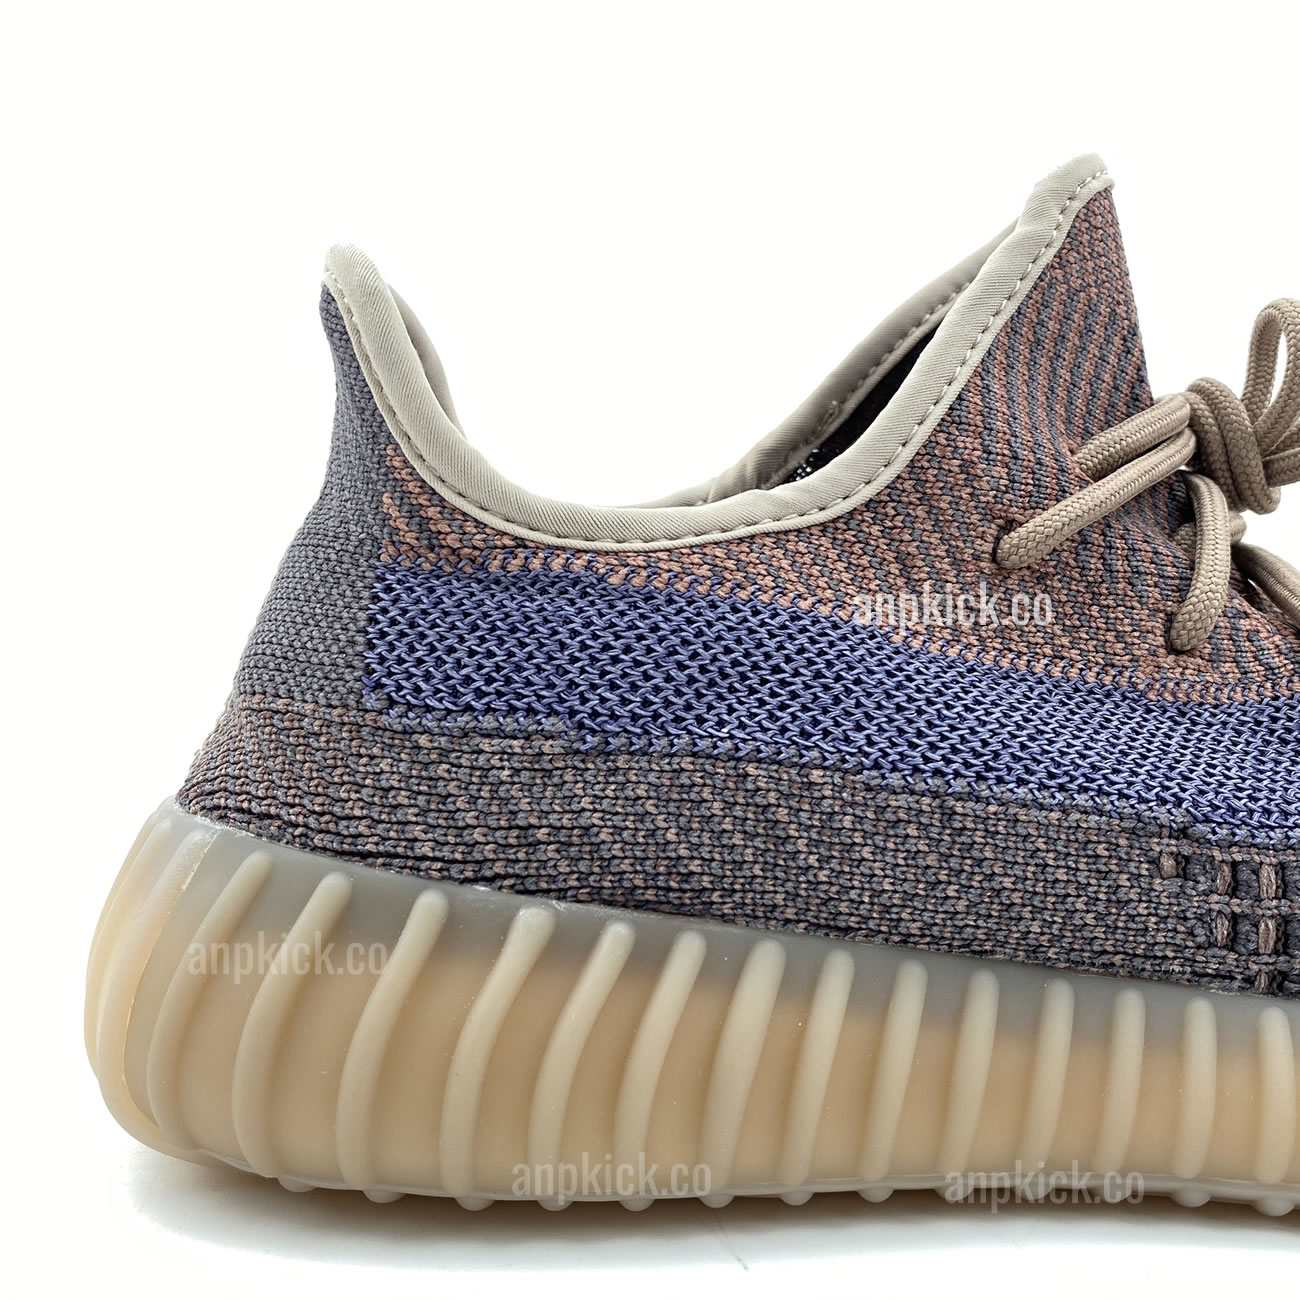 Adidas Yeezy Boost 350 V2 Yecher Ho2795 New Release Date First Look (5) - www.newkick.org